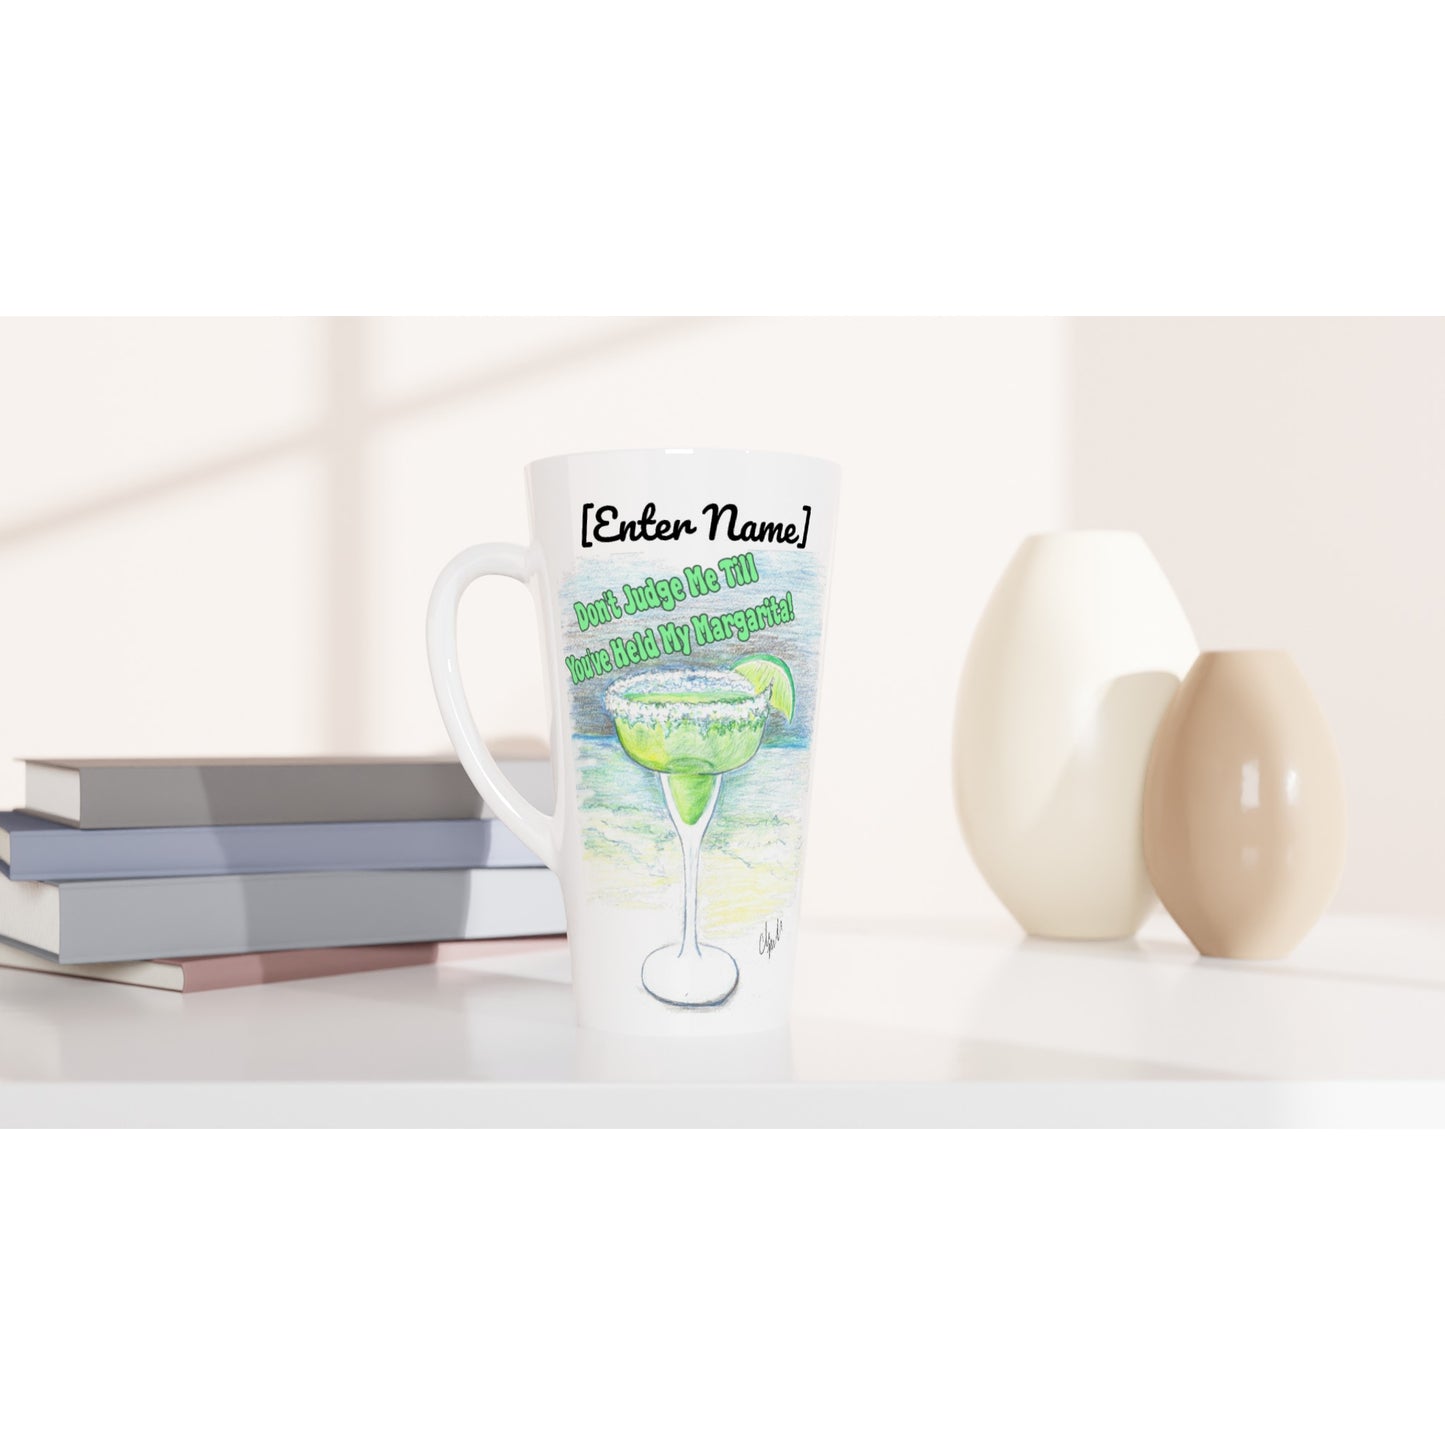 Personalized Seventeener white ceramic 17oz mug with motto Don't Judge Me till You've Held my Margarita dishwasher and microwave safe from WhatYa Say Apparel sitting on coffee table with books and two vases.